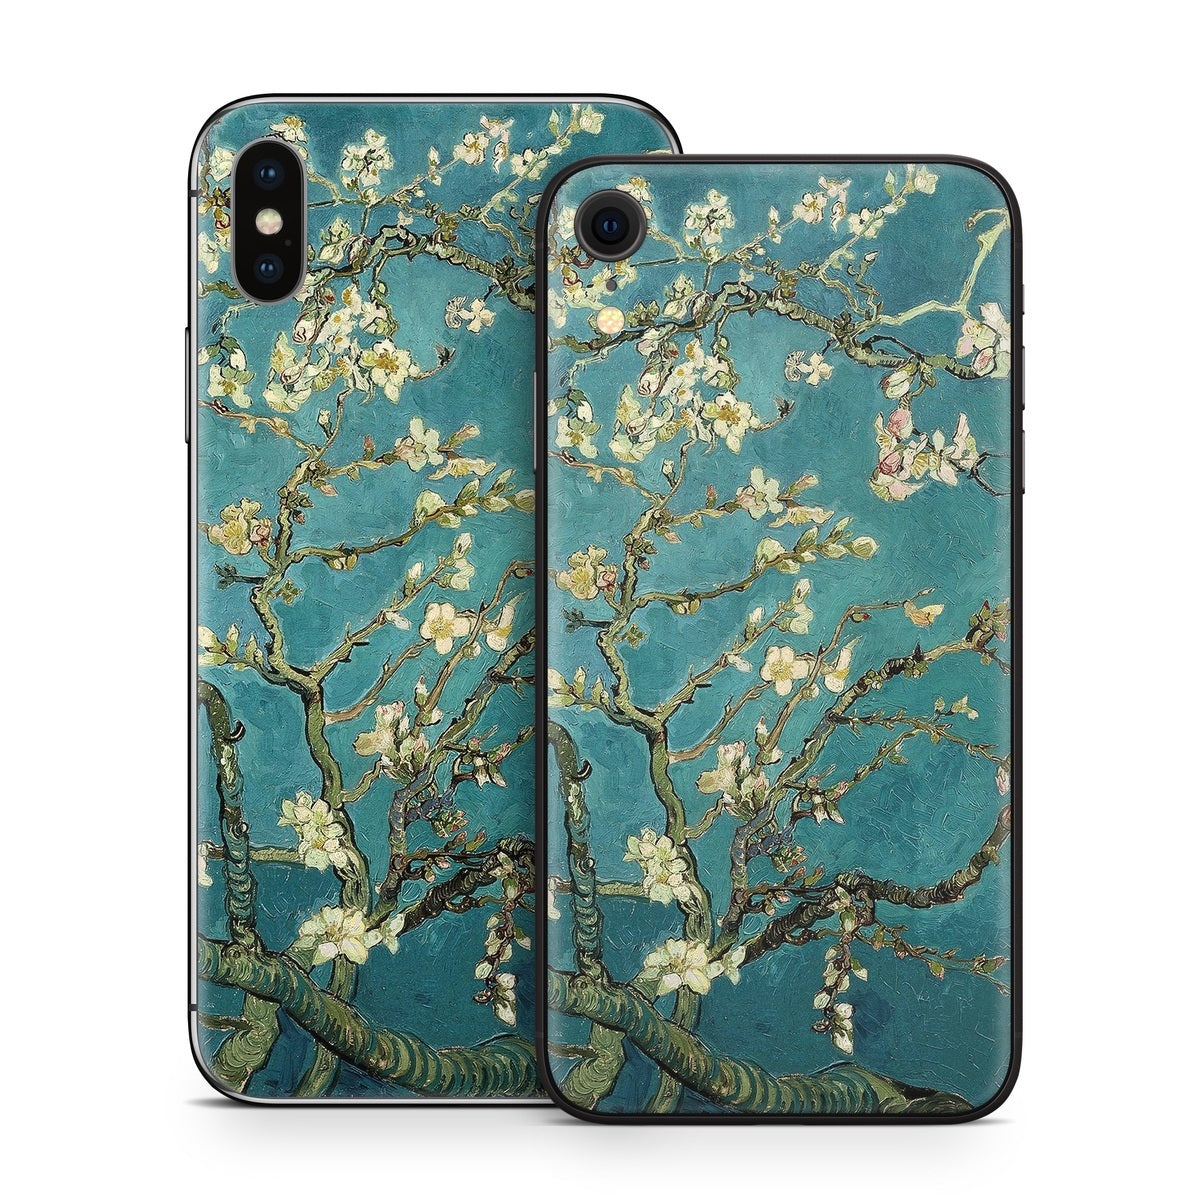 Blossoming Almond Tree - Apple iPhone X Skin